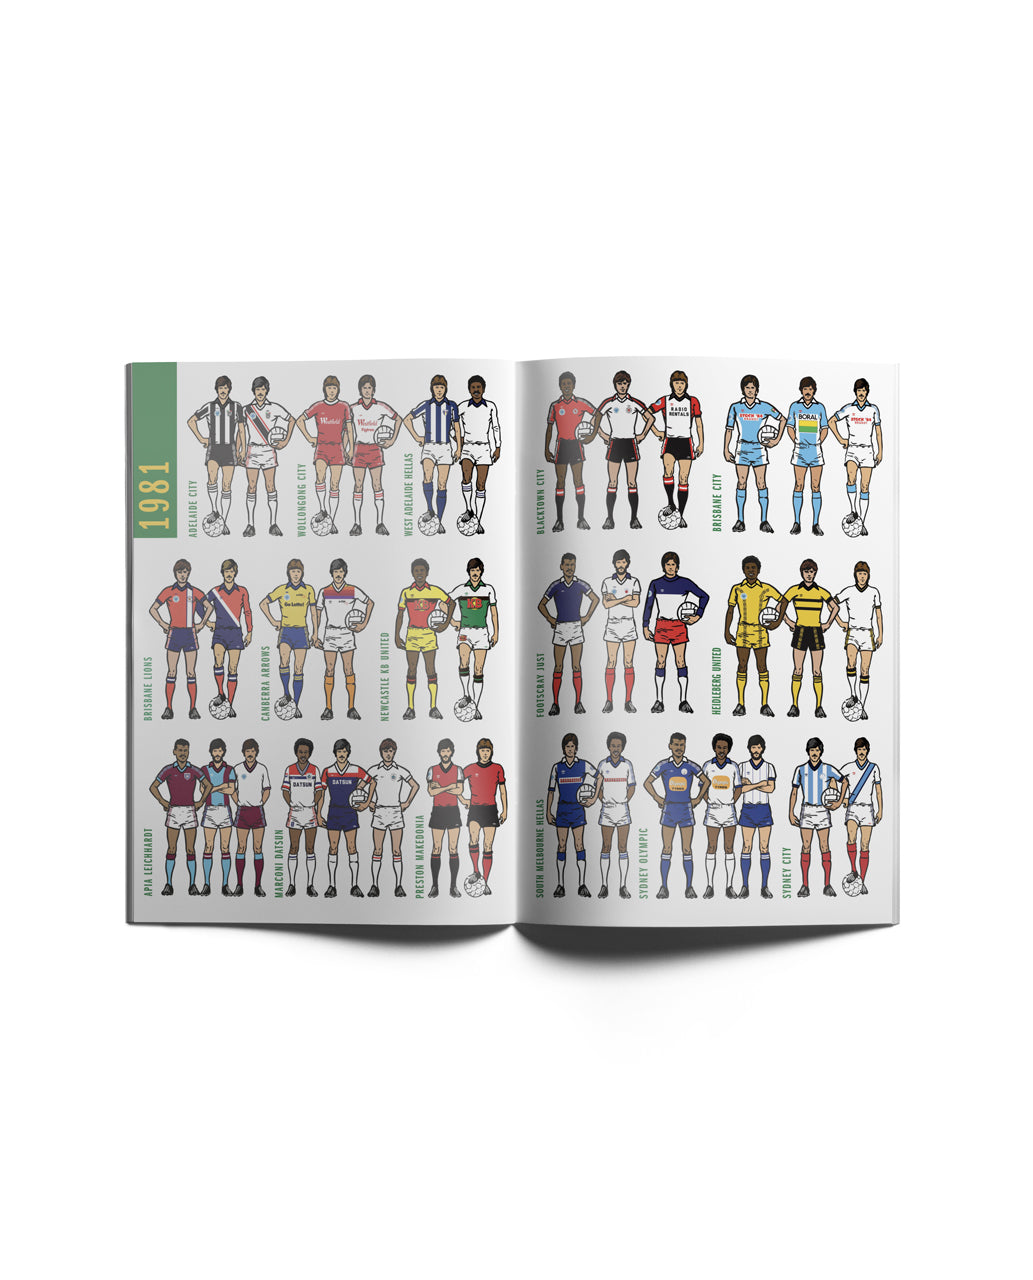 The National Soccer League 1980–1990: An Illustrated History by Peter O'Toole